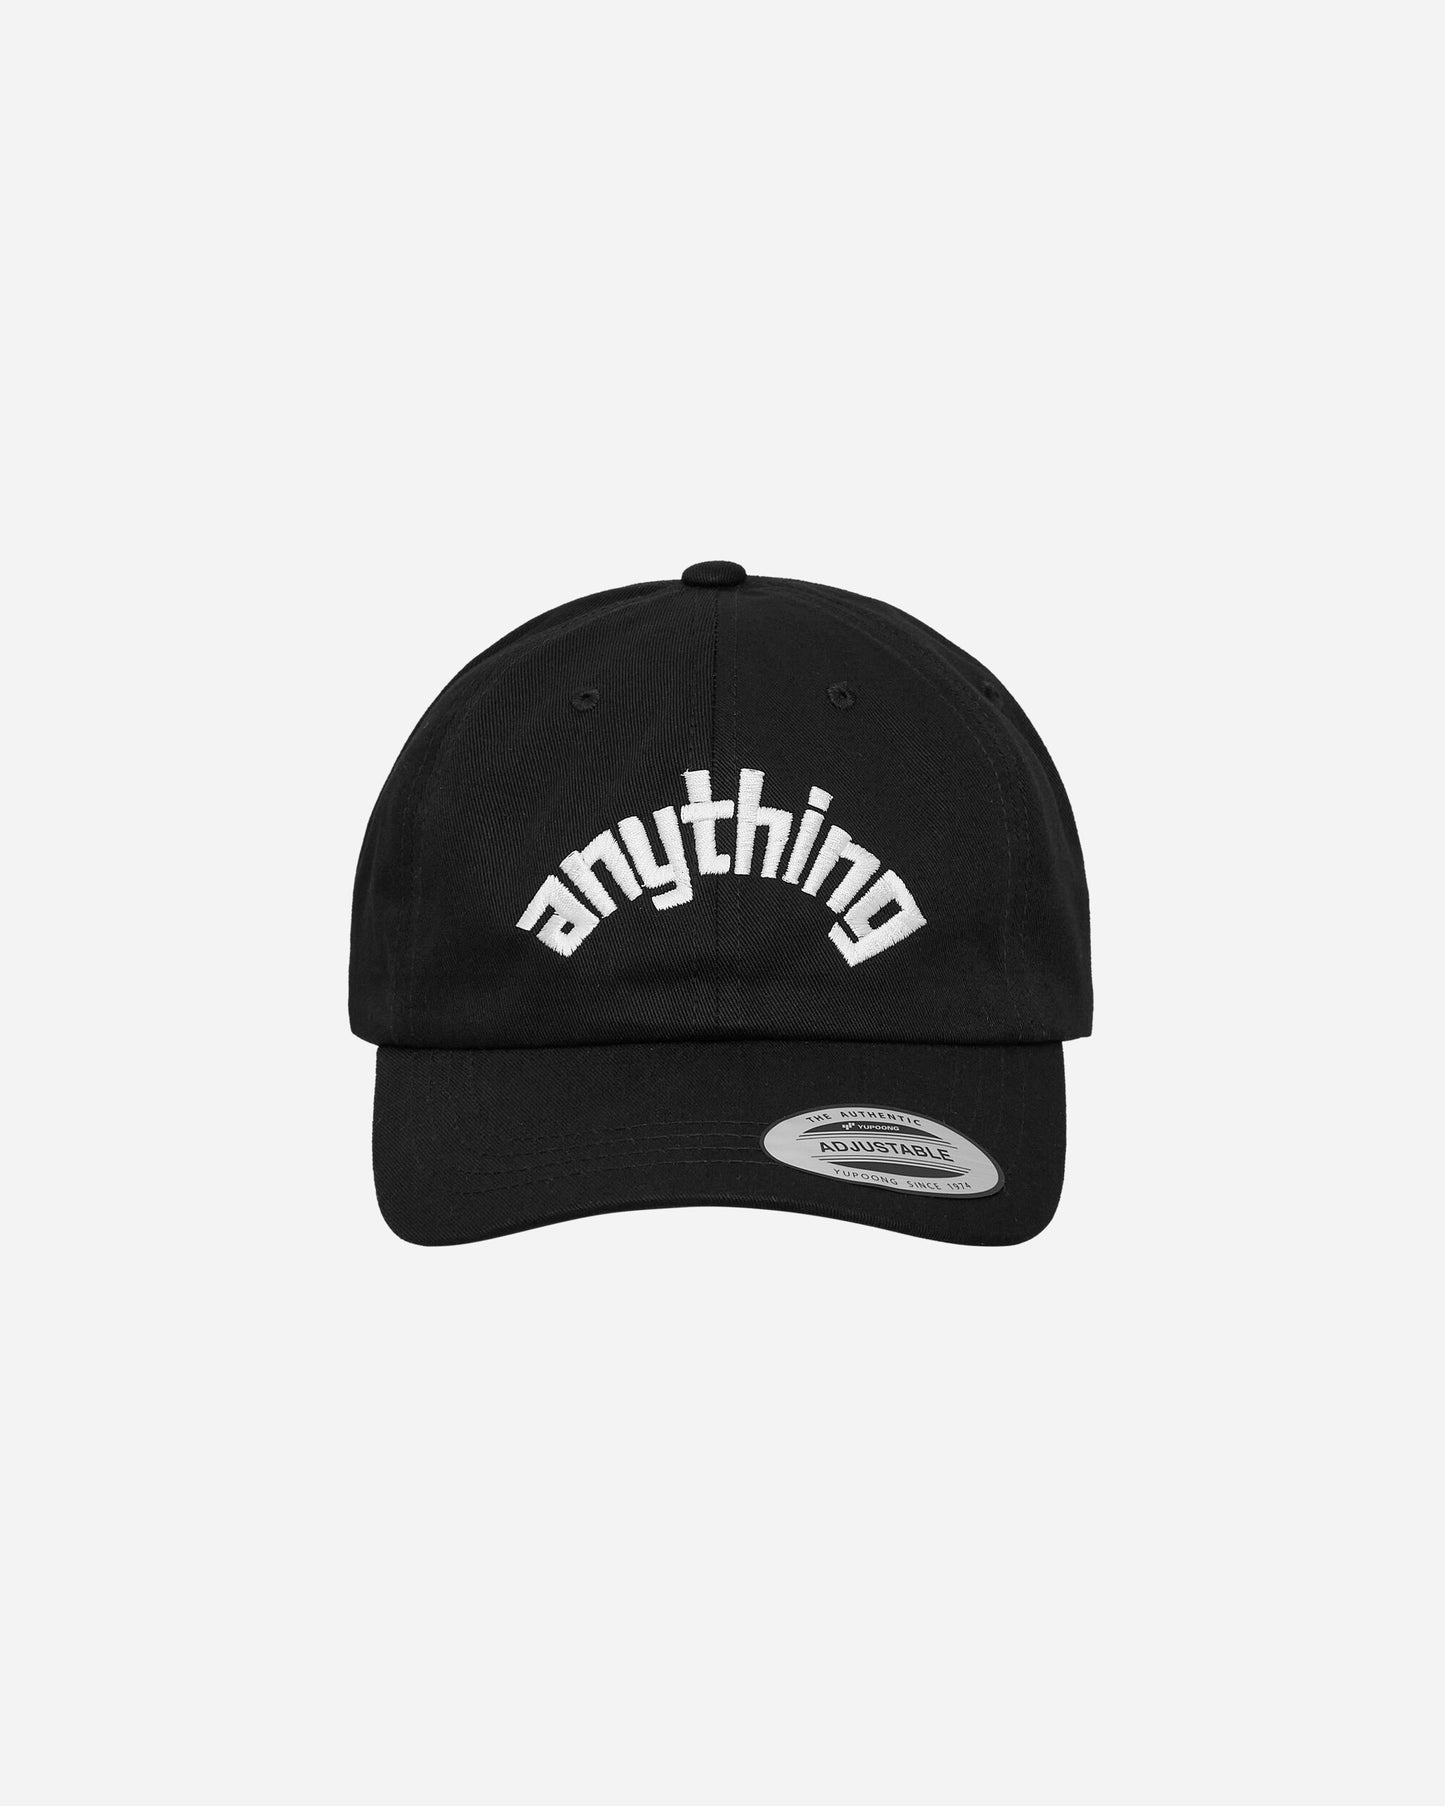 aNYthing Curved Logo Dad Hat Black Hats Caps ANY-102 BK